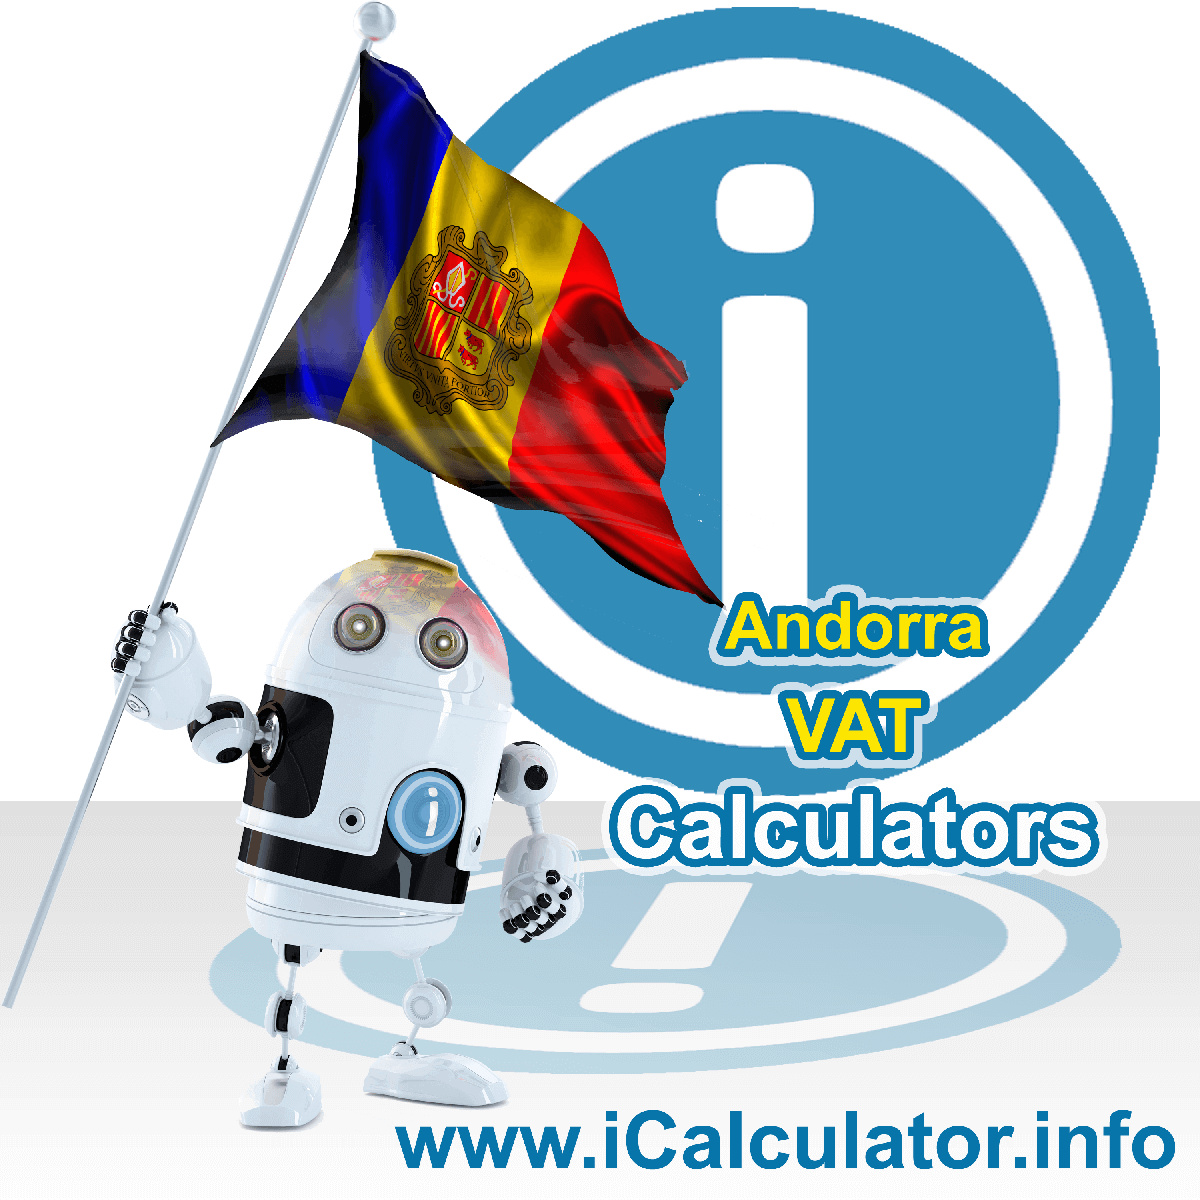 Andorra VAT Calculator. This image shows the Andorra flag and information relating to the VAT formula used for calculating Value Added Tax in Andorra using the Andorra VAT Calculator in 2023